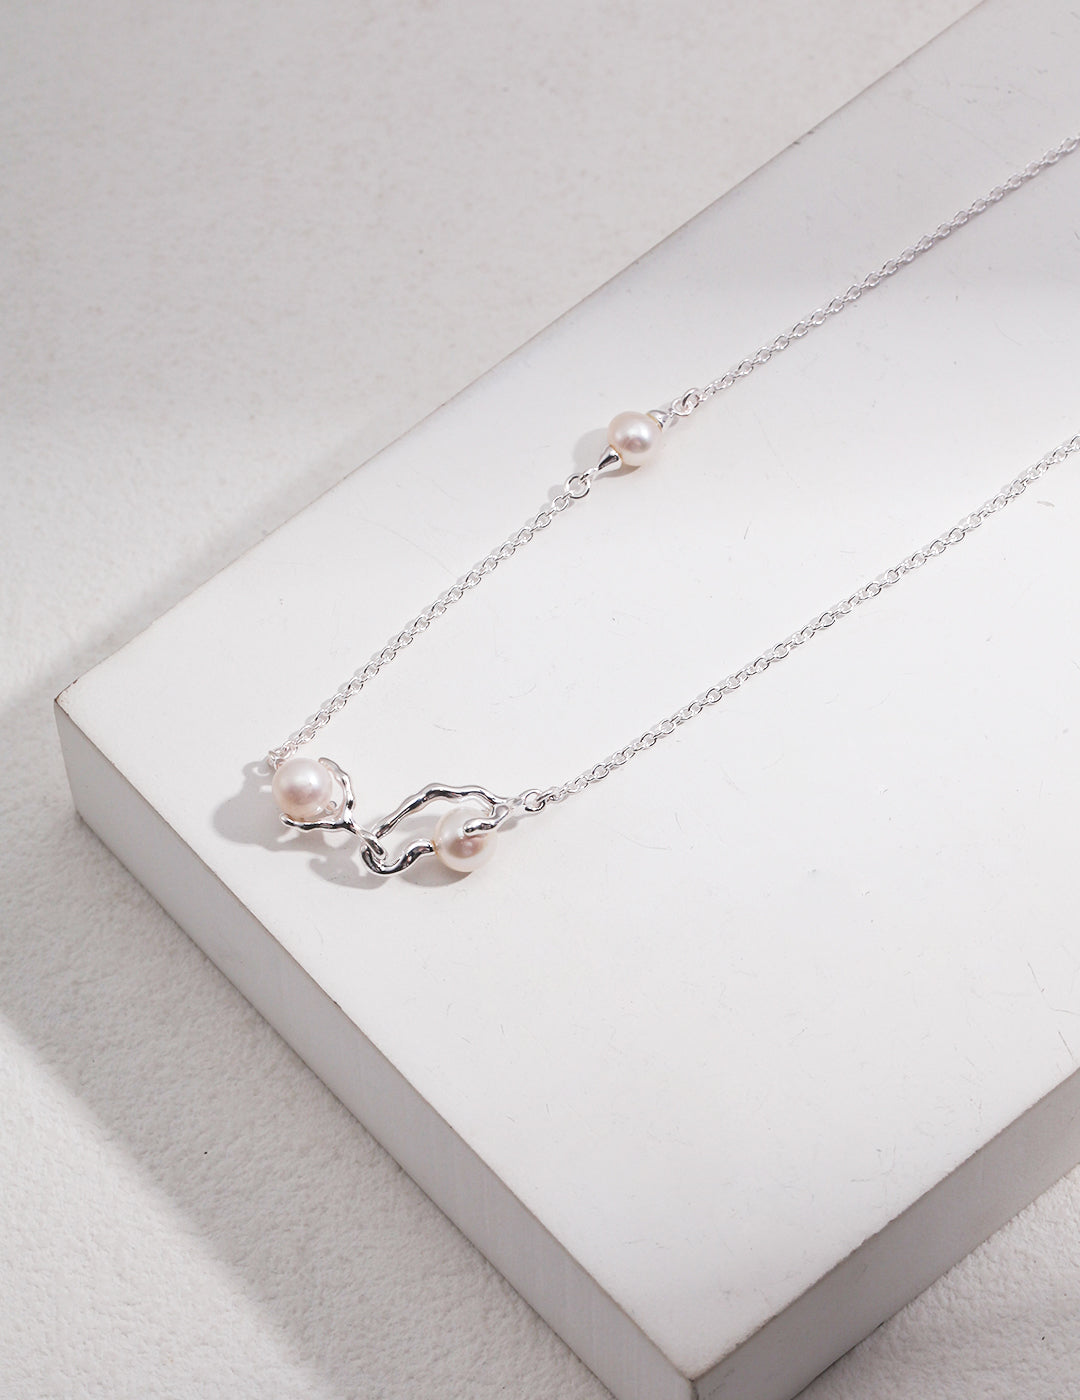 Artistic Interpretation: Solid Silver Necklace with Withered Vines and Nest-inspired Design